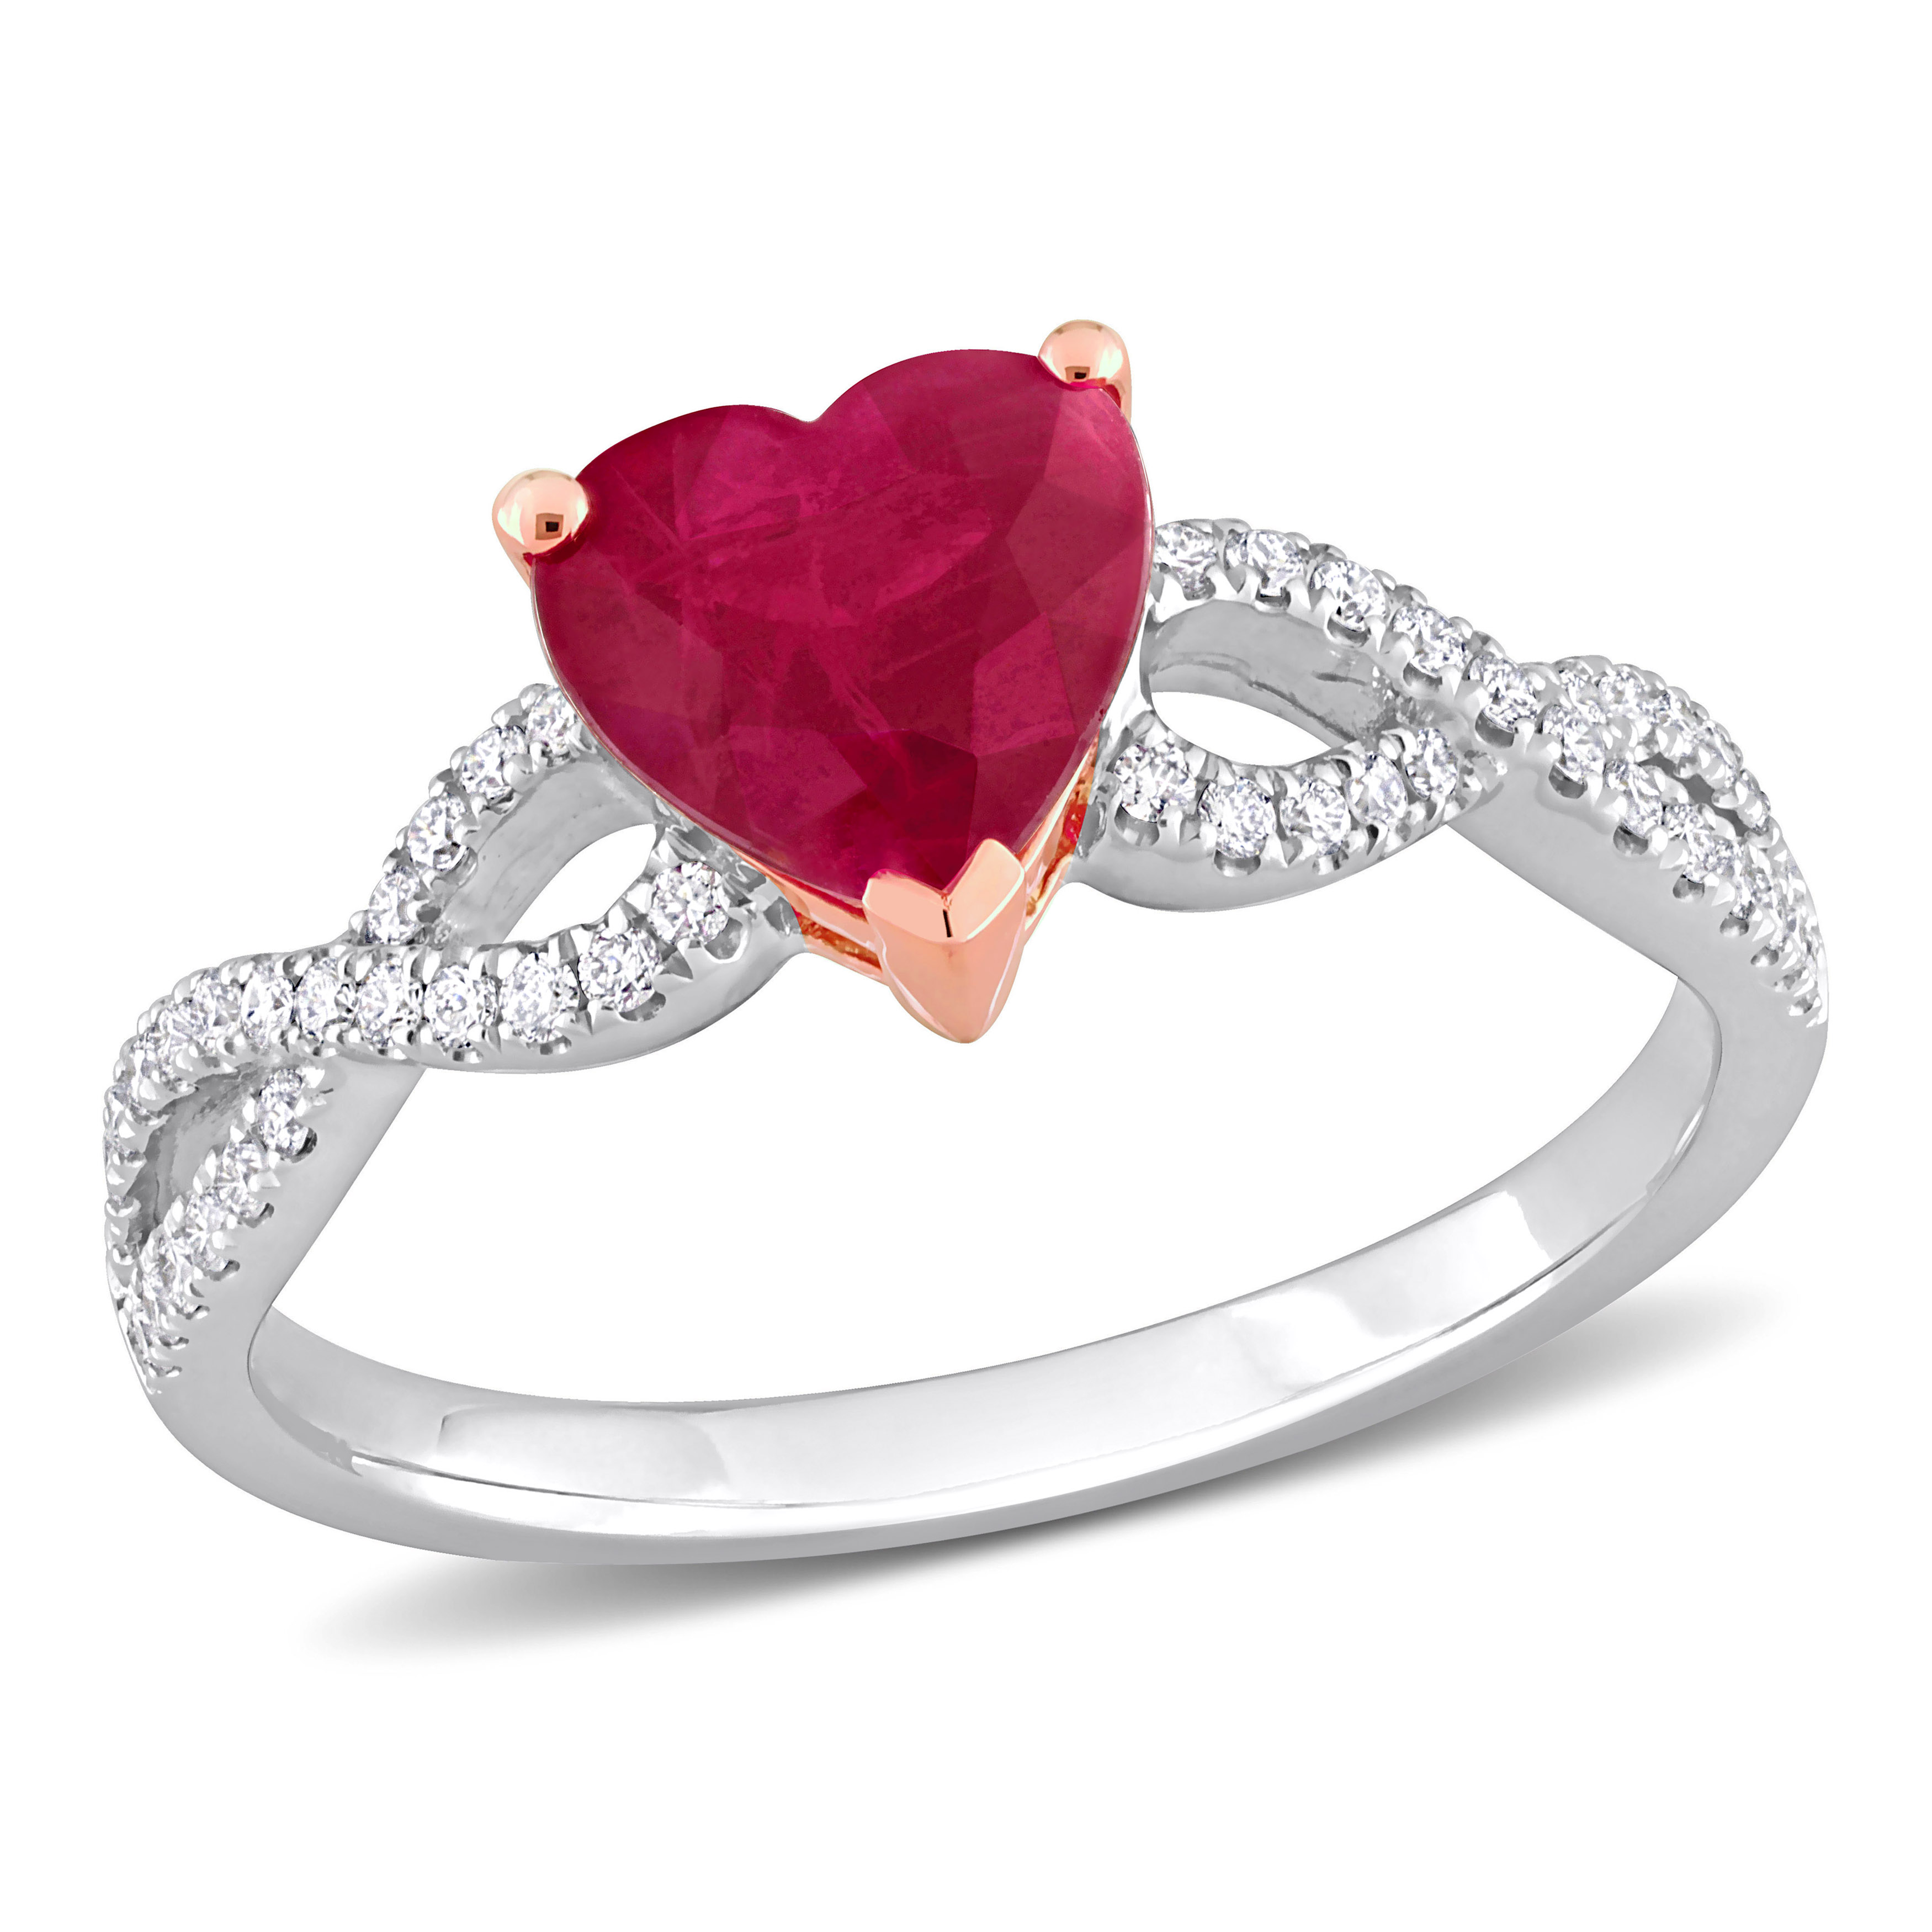 1/4 CT TW Diamond and Ruby Heart Infinity Ring in 14k 2-Tone White and Rose Gold